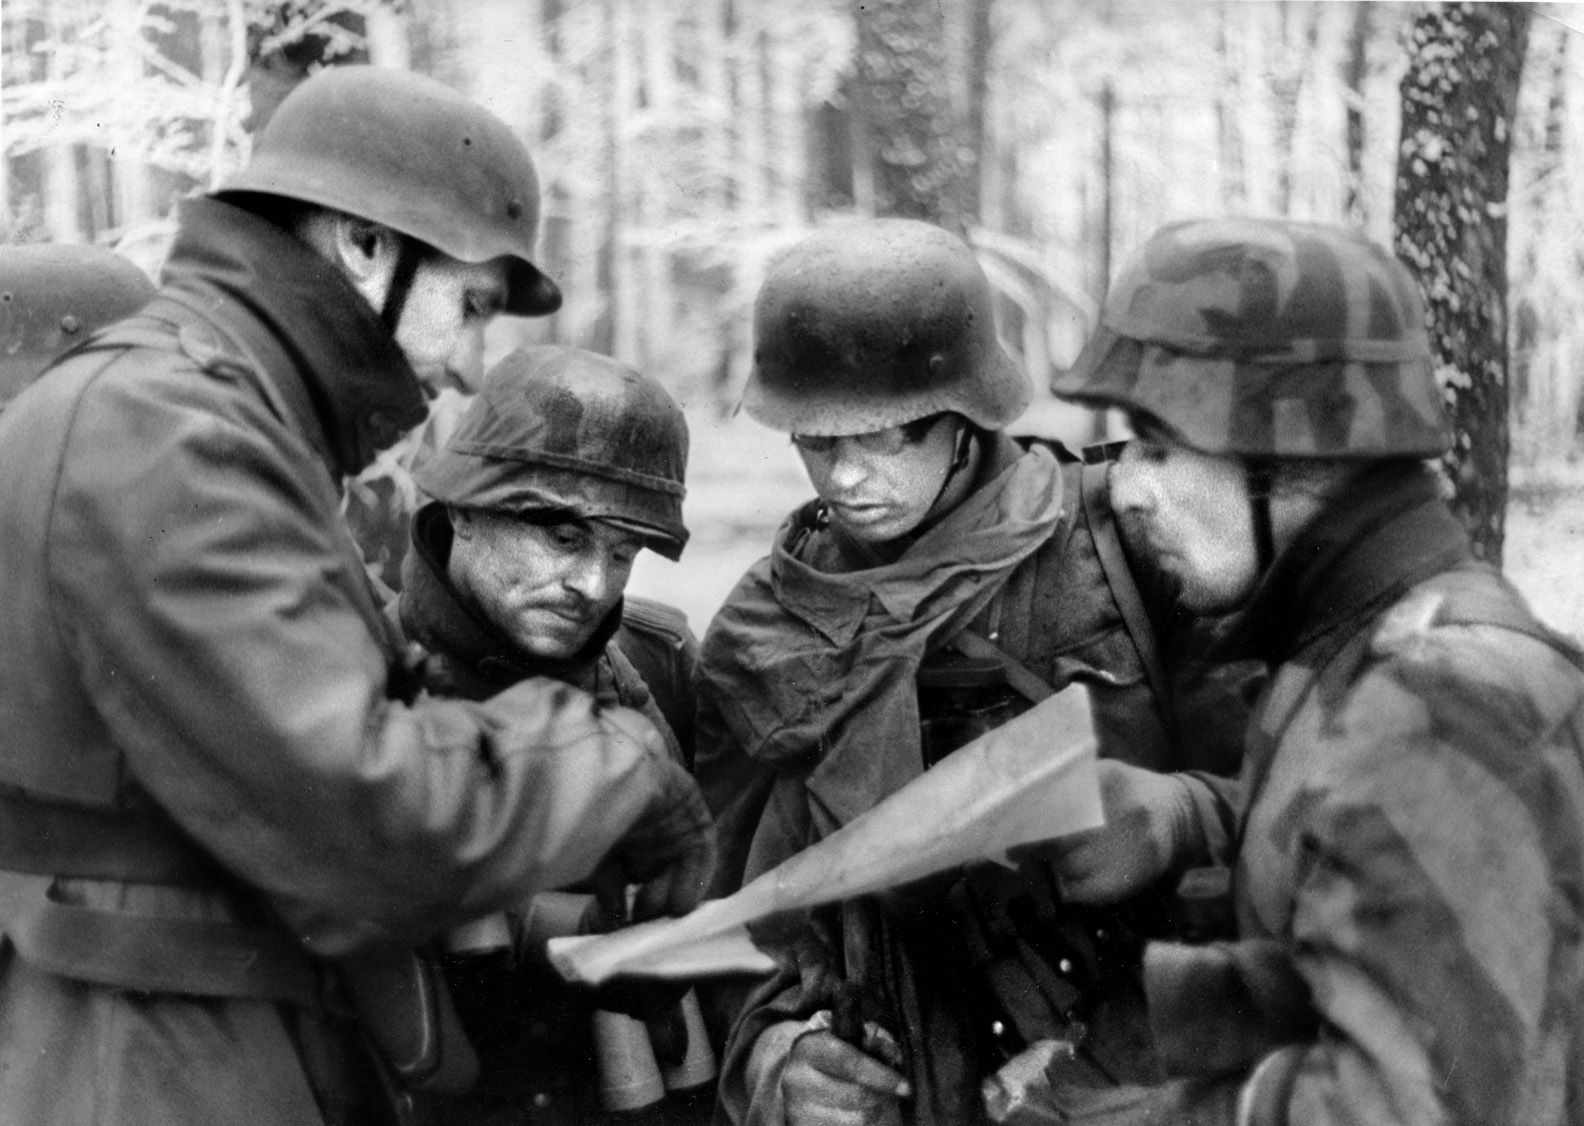 Prior to an assault during the Battle of the Bulge, a German battalion commander gives last-minute instructions to a group of soldiers poring over a map of the vicinity. Lieutenant Lyle Bouck of the 394th I&R Platoon ordered his men to hold their fire when a Belgian girl approached from a nearby house and spoke to a gathering of German officers before the fighting at Lanzerath began.